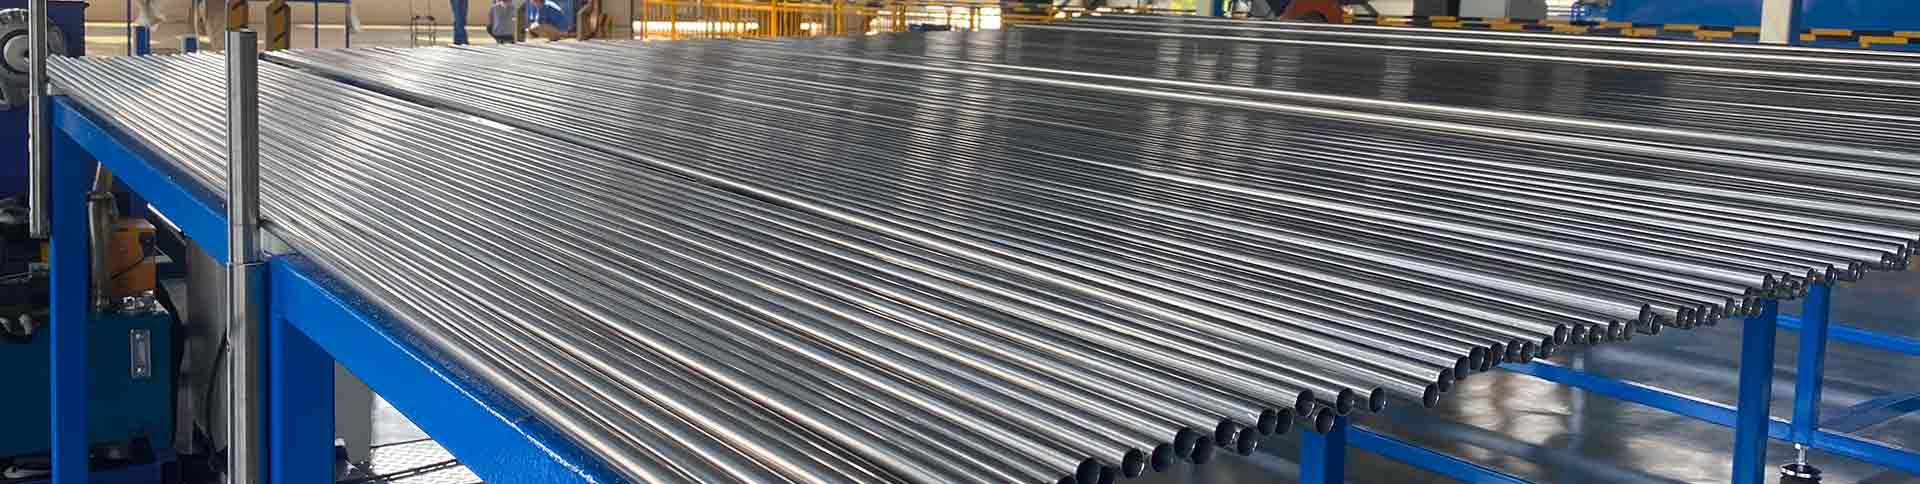 Nickel Piping Products in the Petrochemical Industry